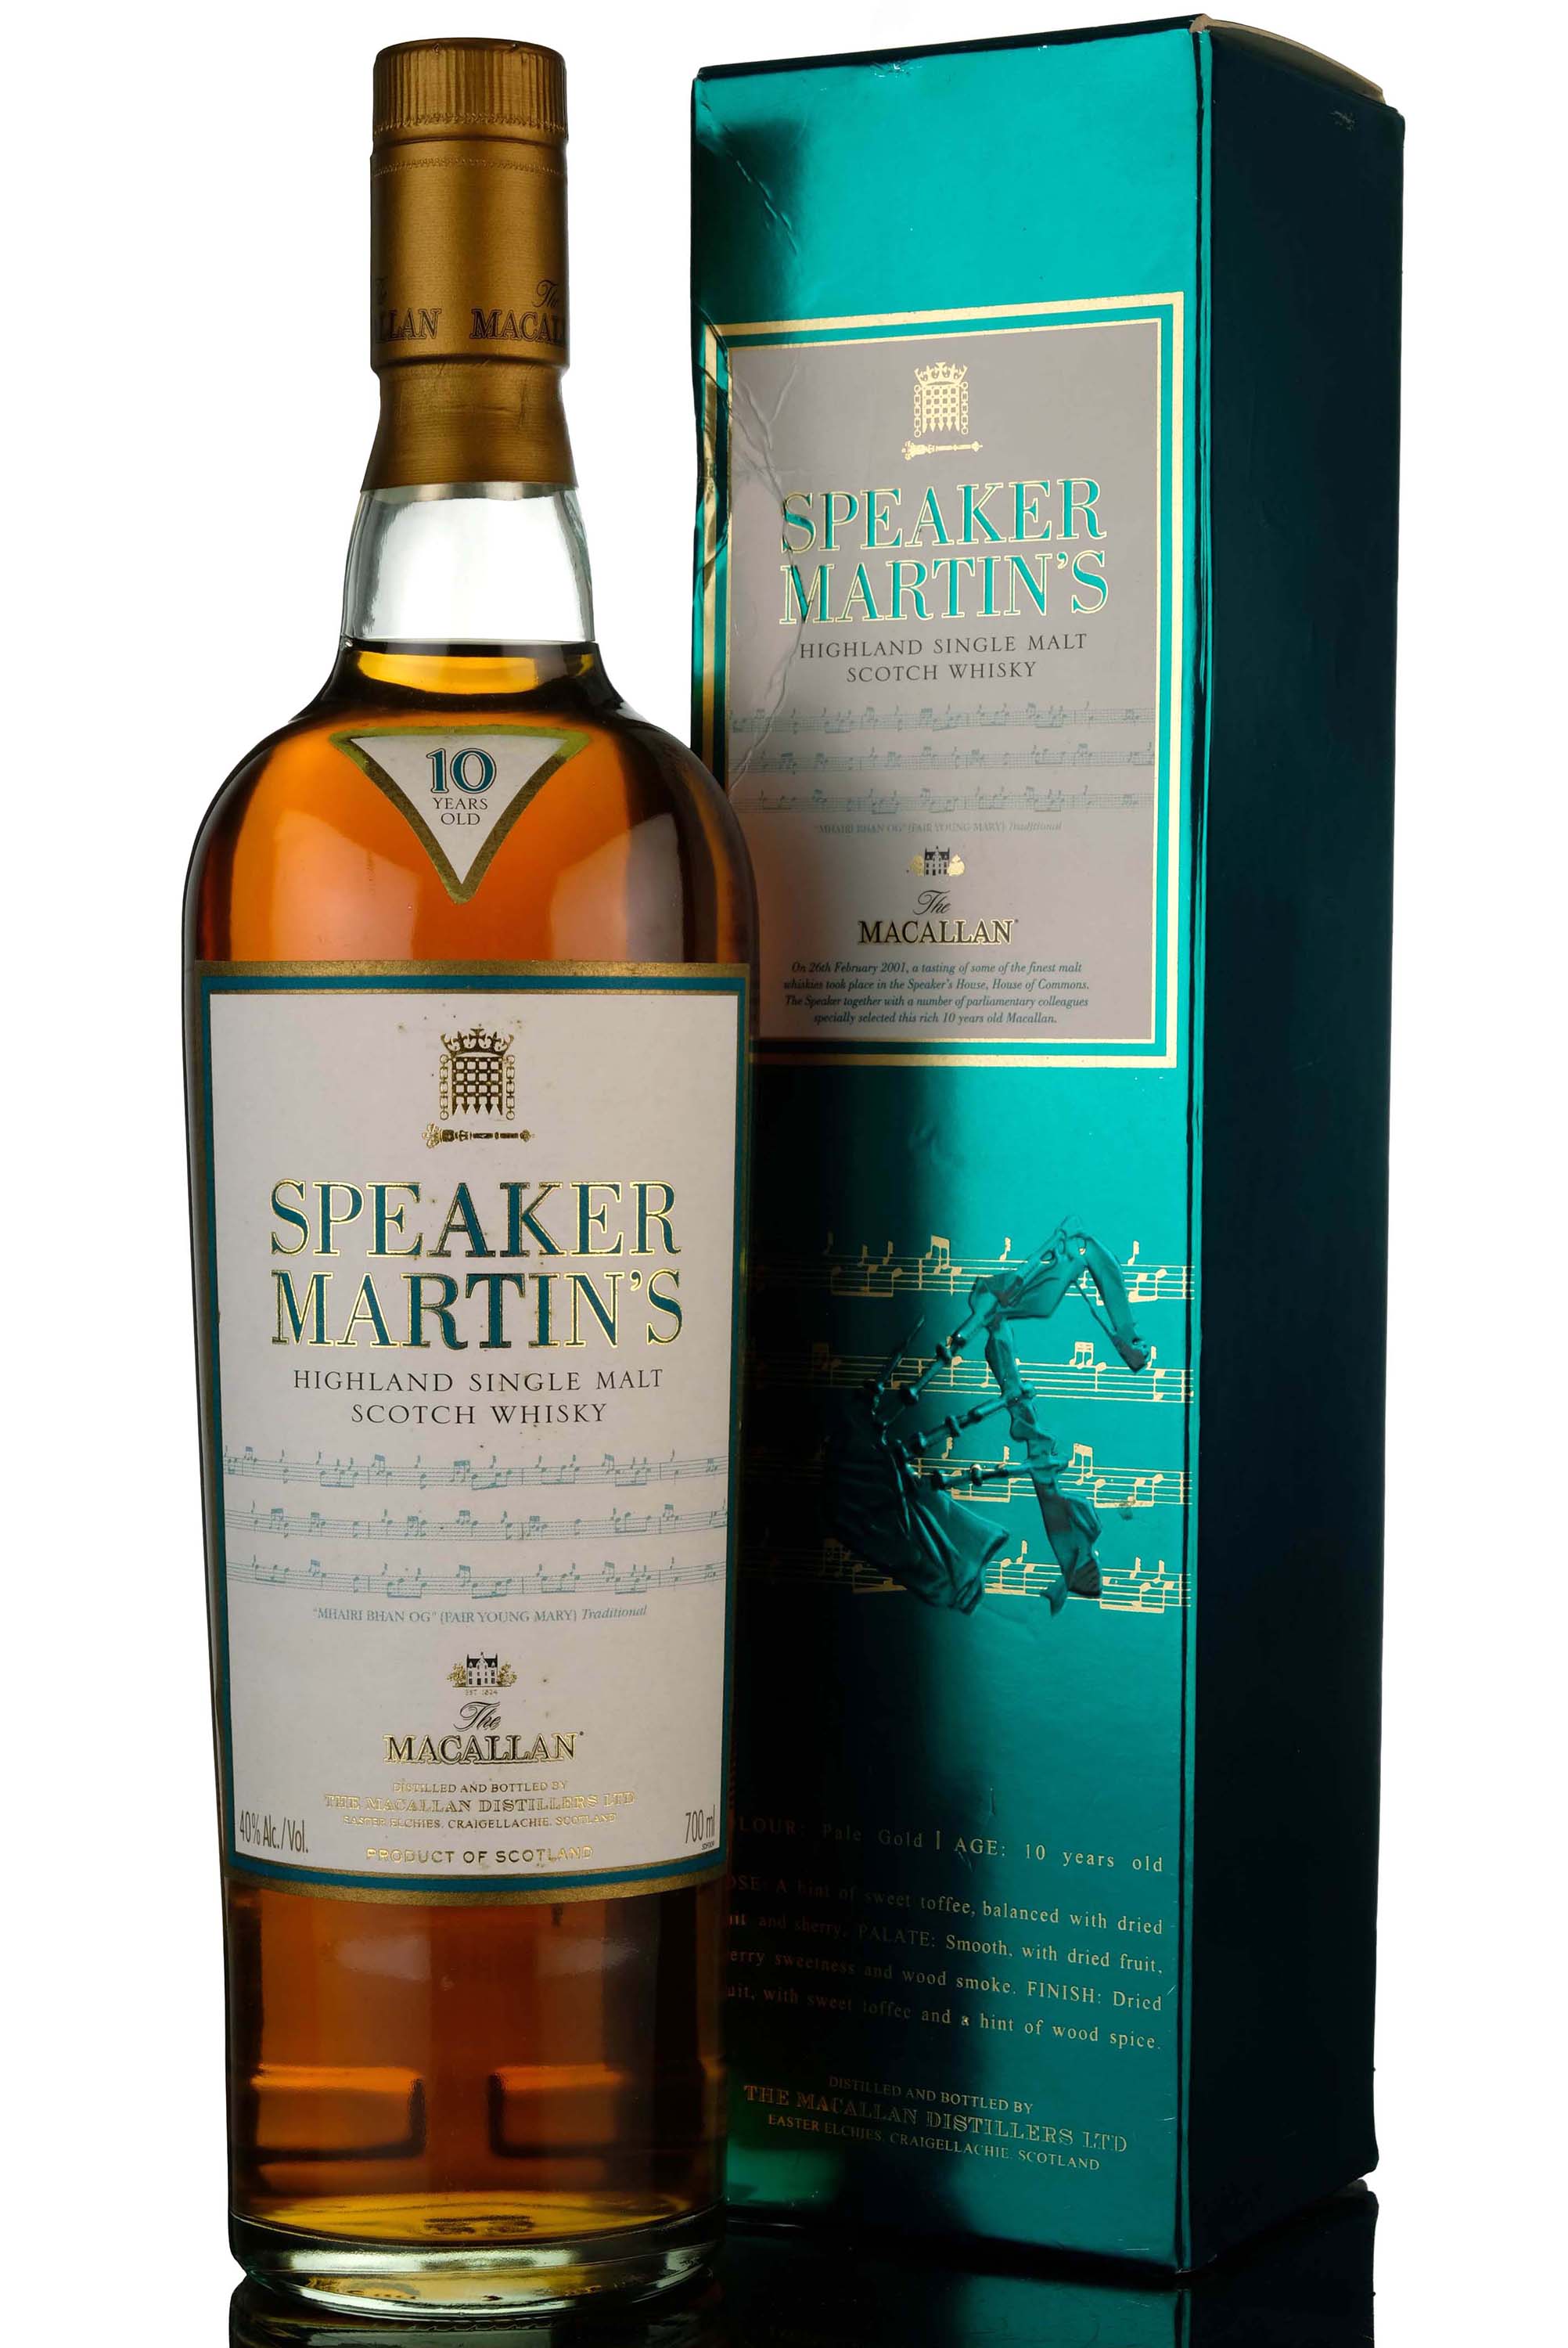 Macallan 10 Year Old - Speaker Martins - Late 2000s - 3rd Edition